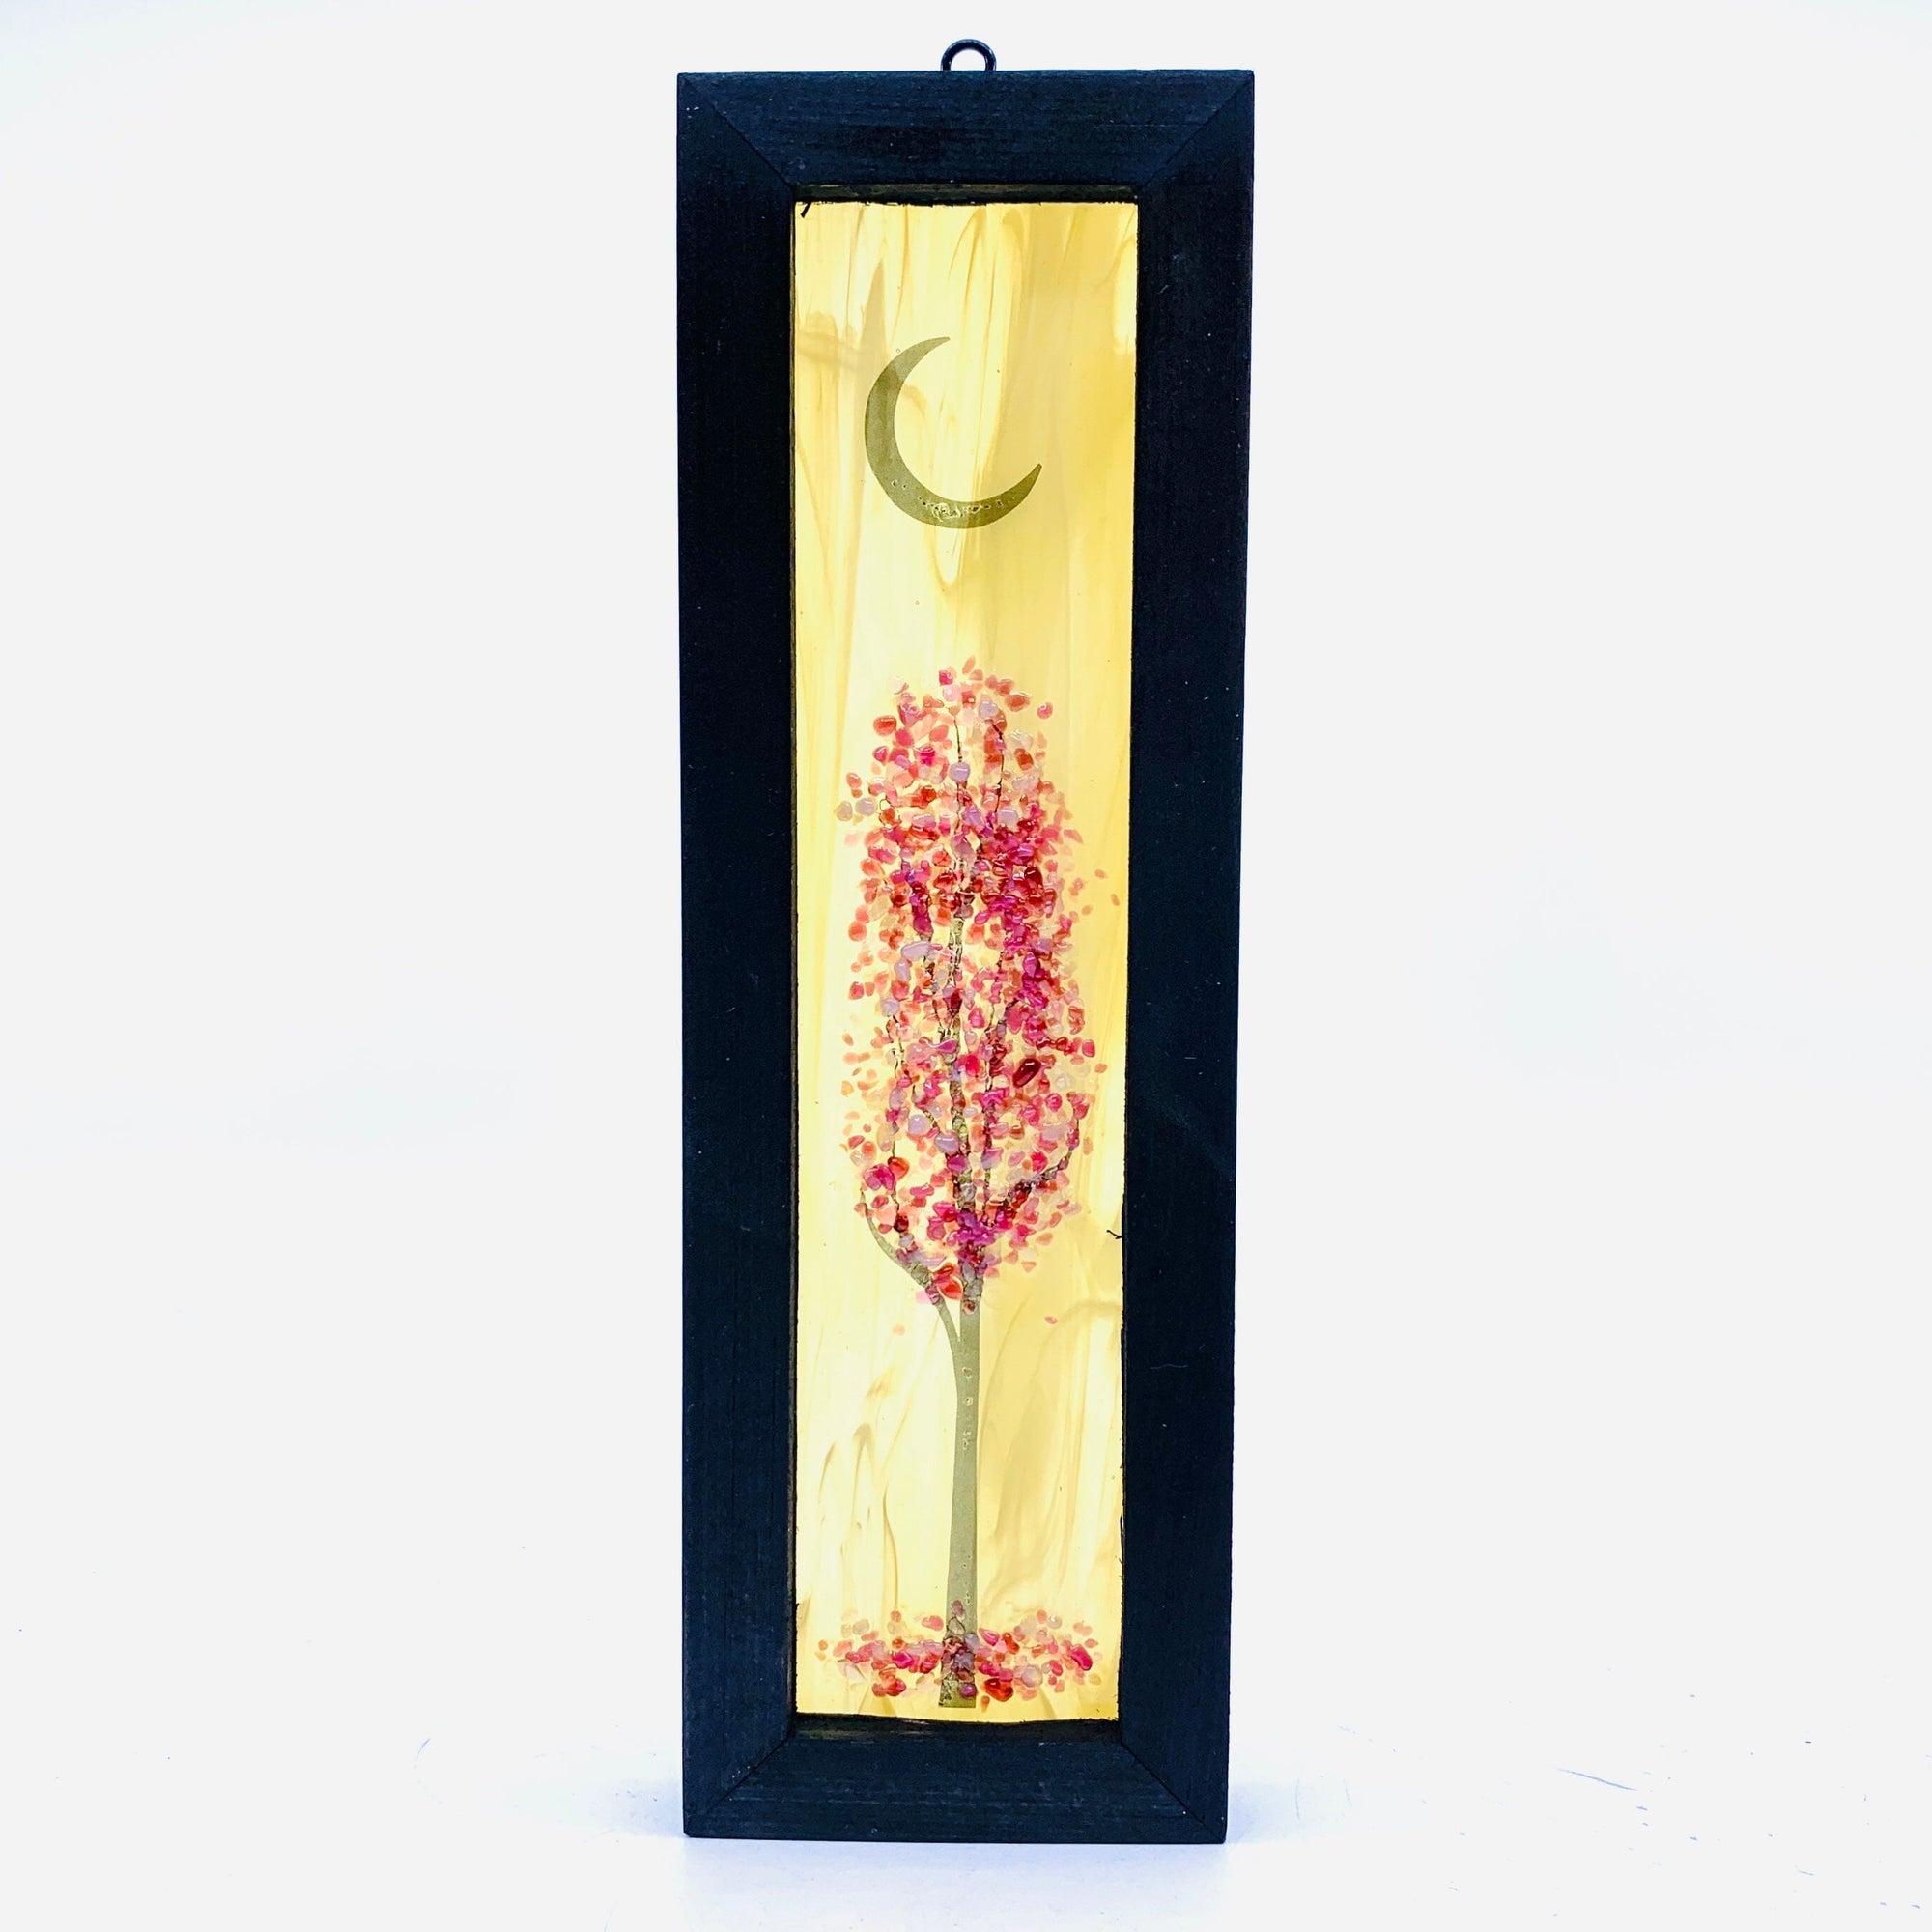 Fused Glass Tree of Life Shadow Box, Crescent Moon 6 Decor Glimmer Glass Gifts 